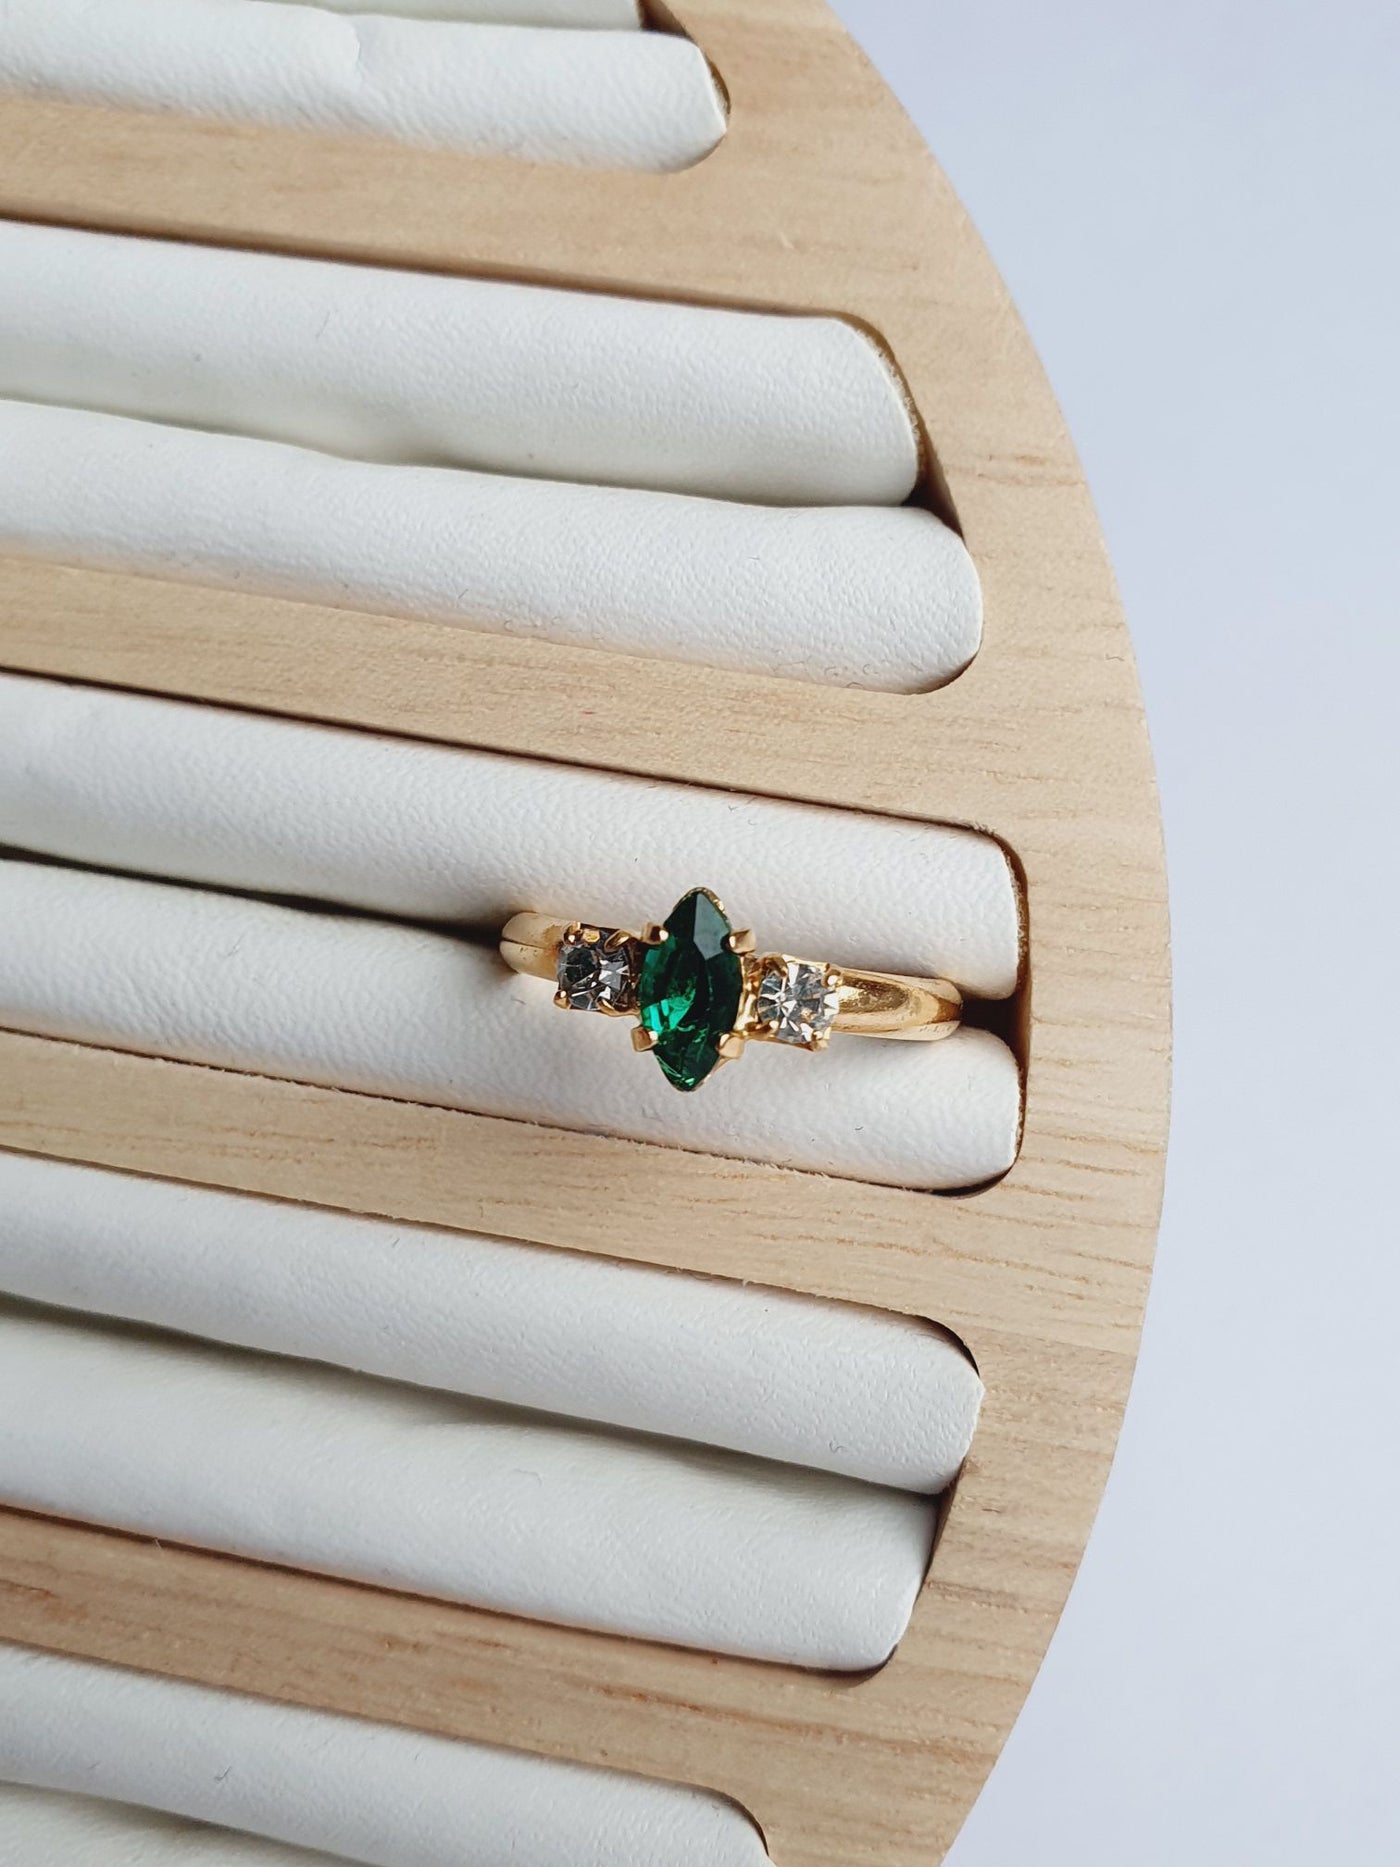 Green - Vintage Gold Plated Ring with Crystal